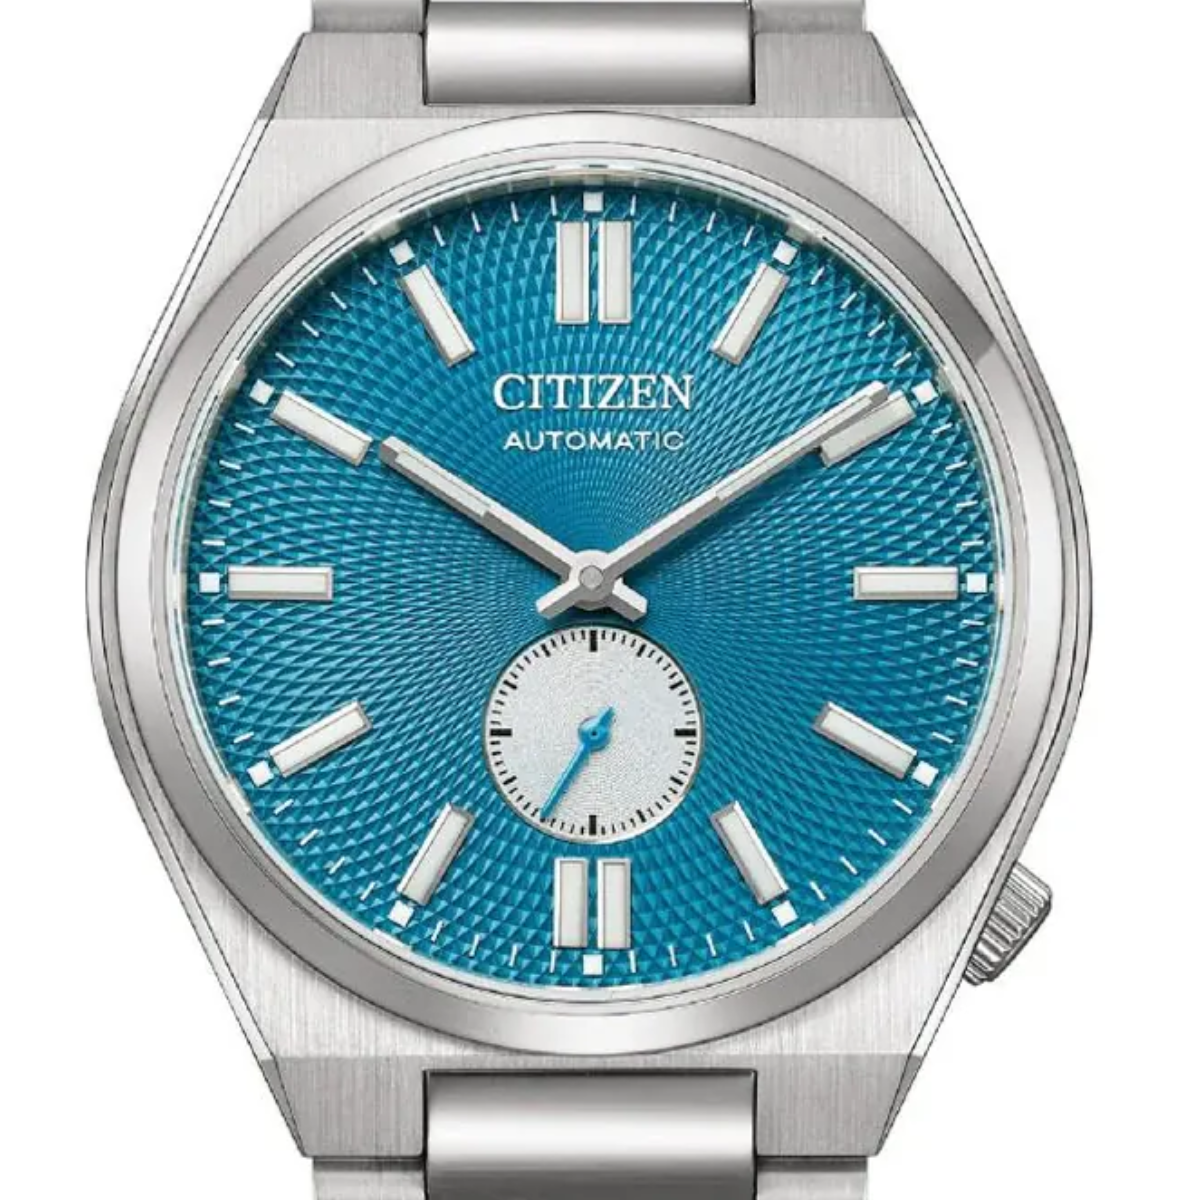 NK5010-51L Citizen Automatic Tsuyosa Blue Dial Stainless Steel Watch